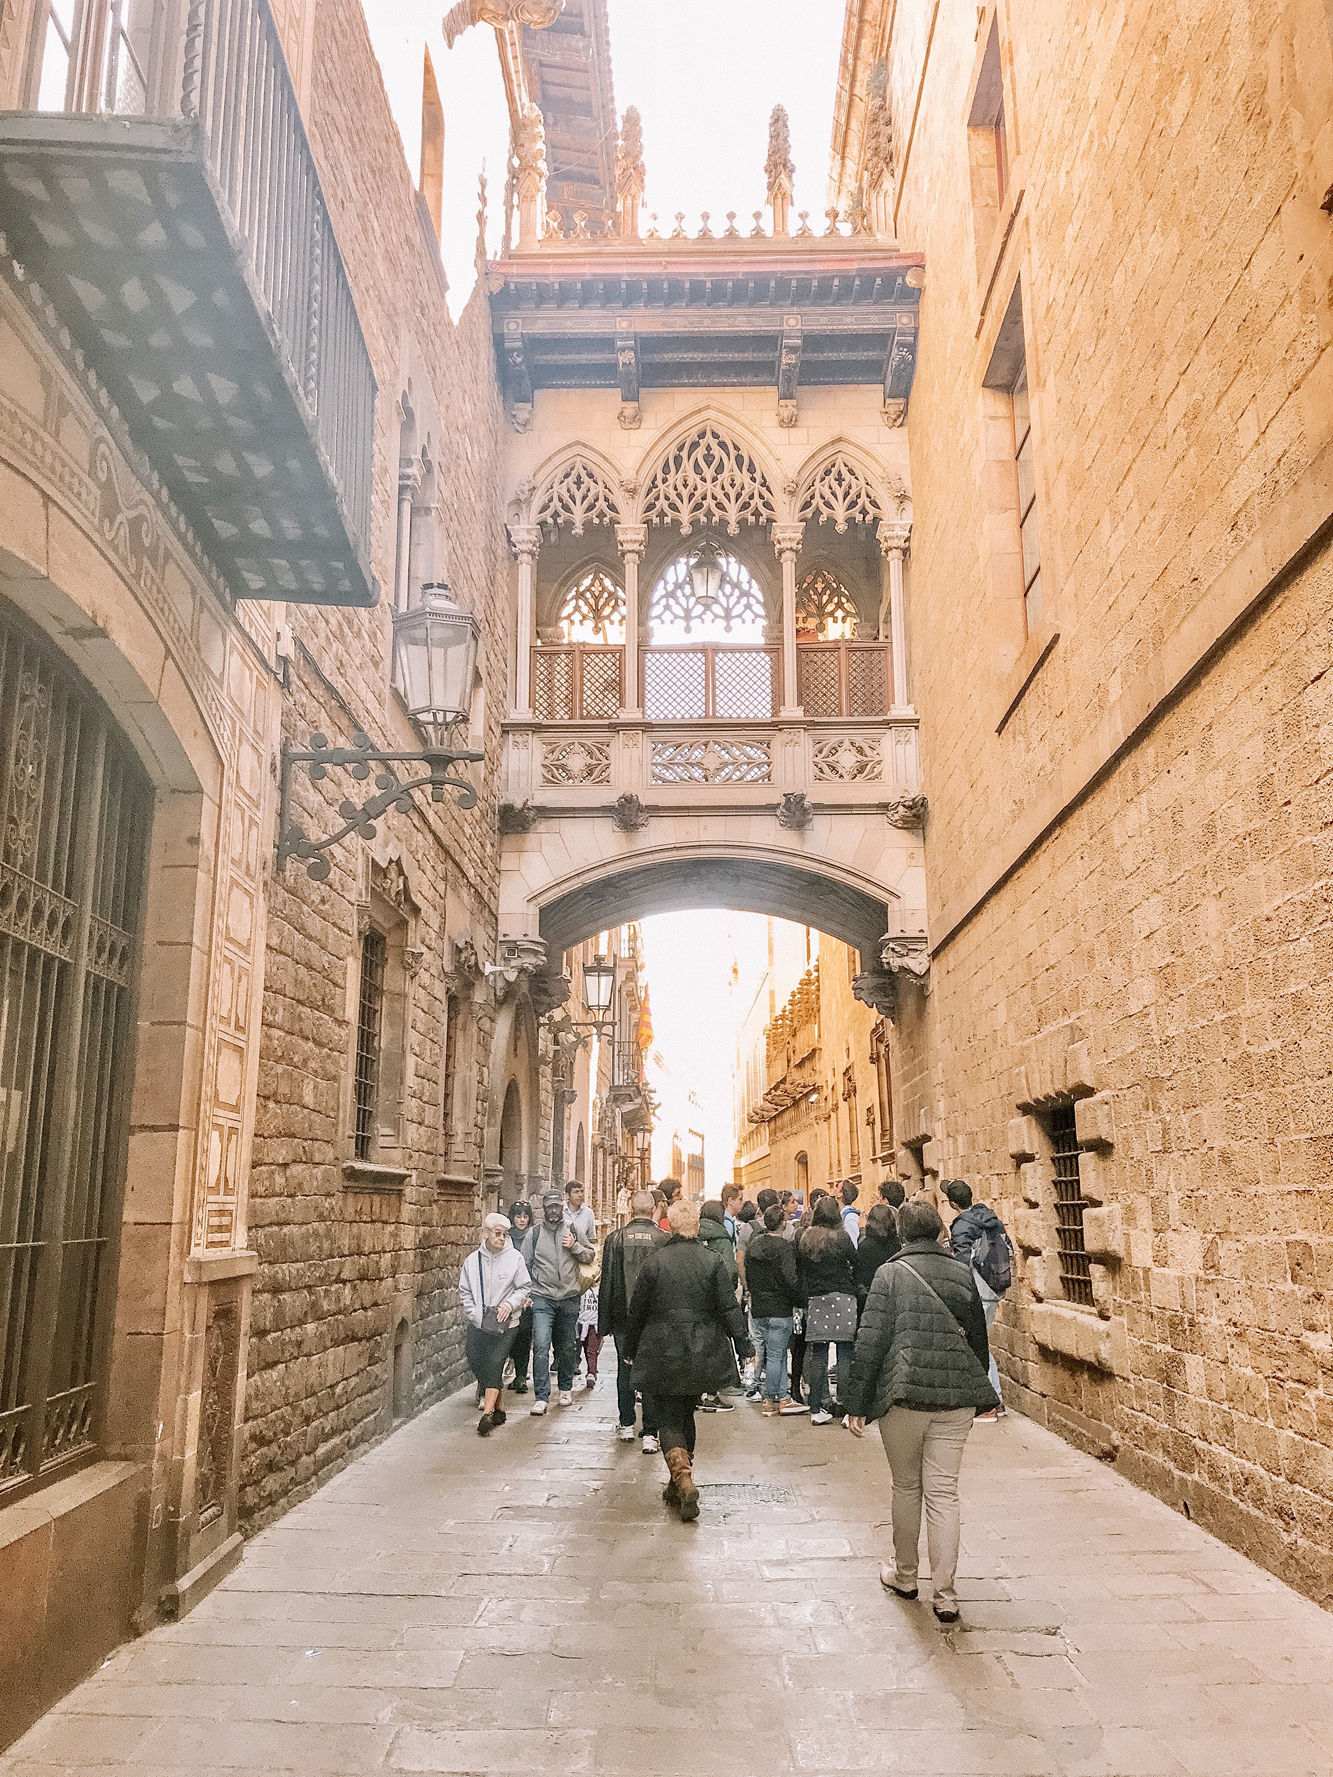 Barcelona Travel Guide - Where to stay, eat and play in one of the most popular cities in Spain! One of our favorite cities.